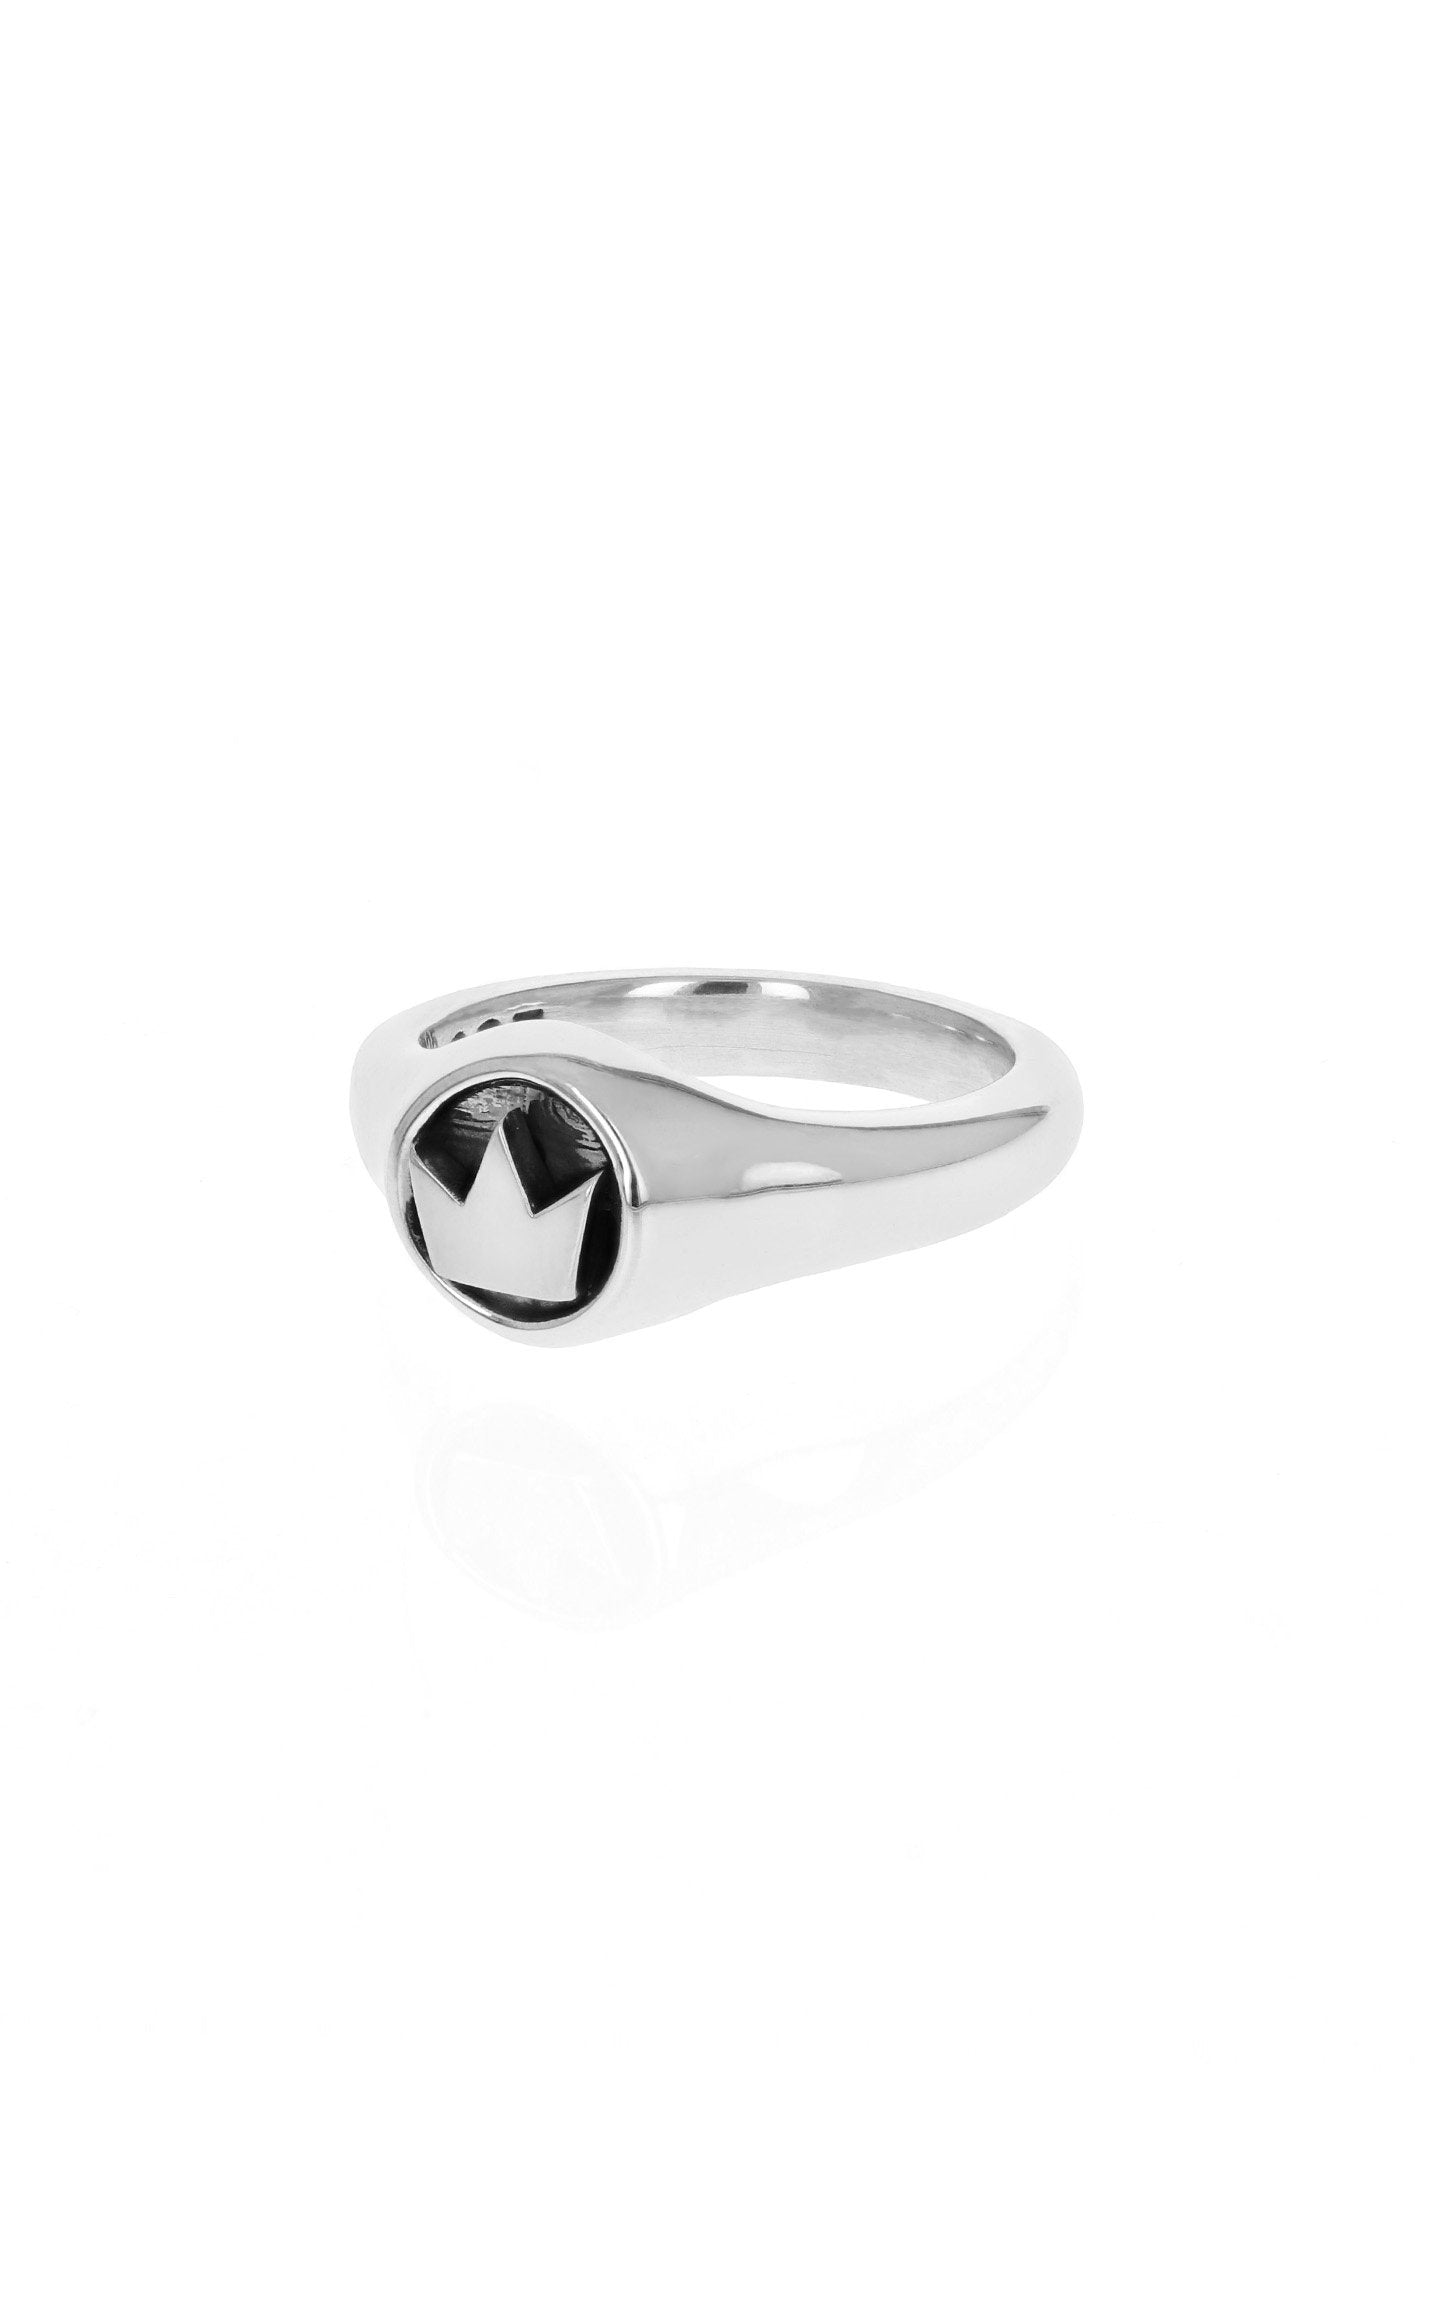 king baby small crown ring